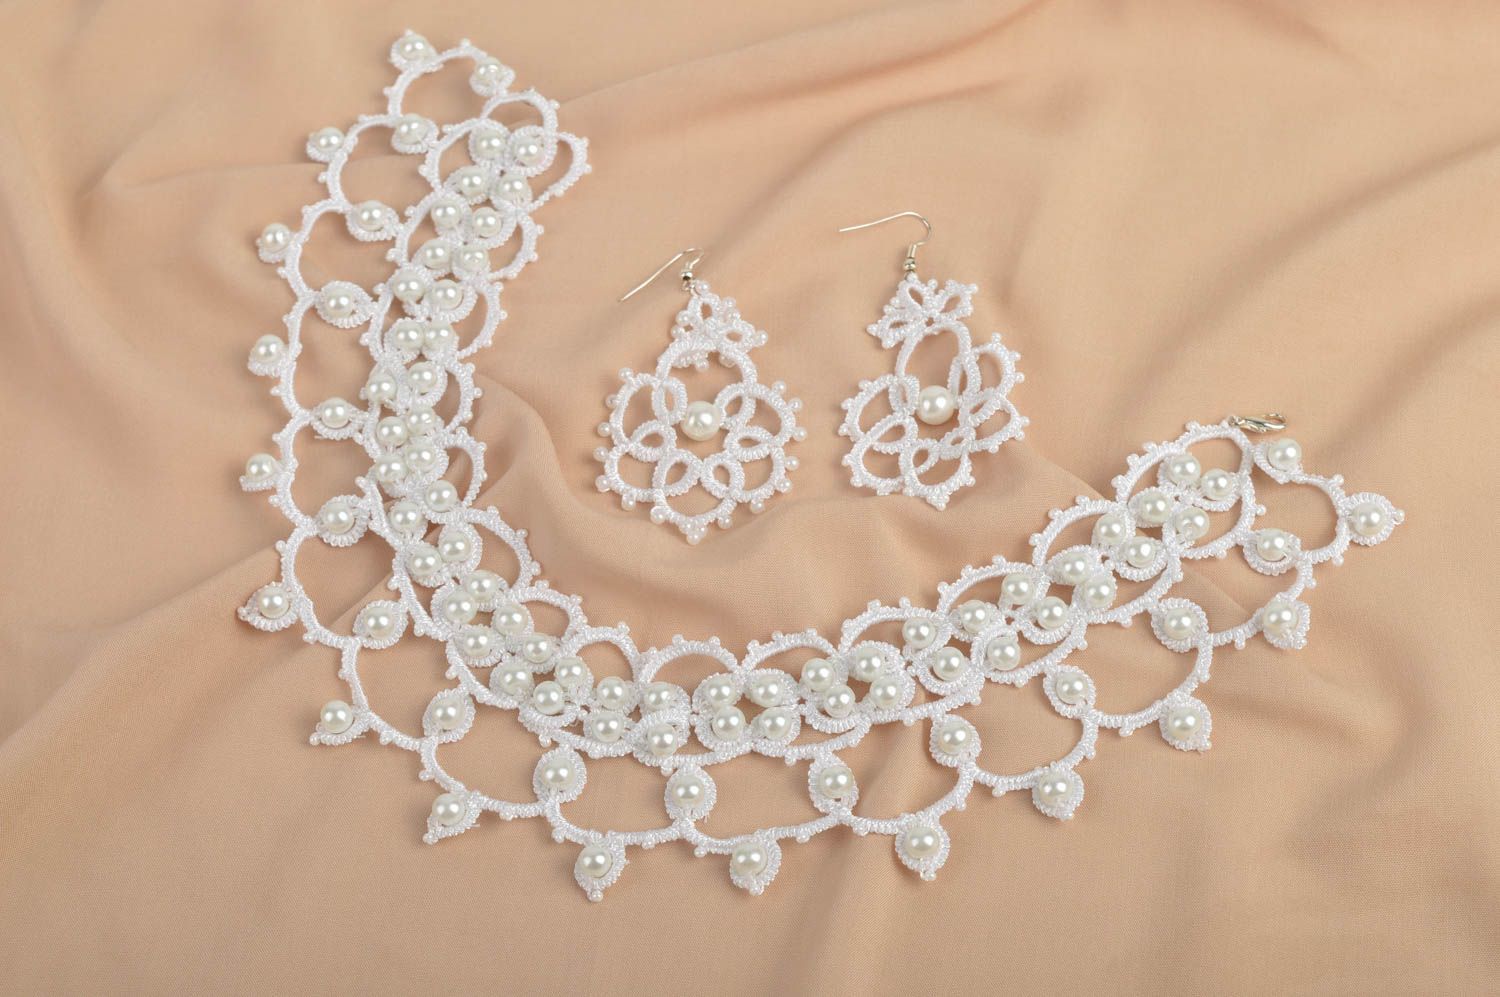 Elegant handmade jewelry set tatting necklace tatting earrings gifts for her photo 1